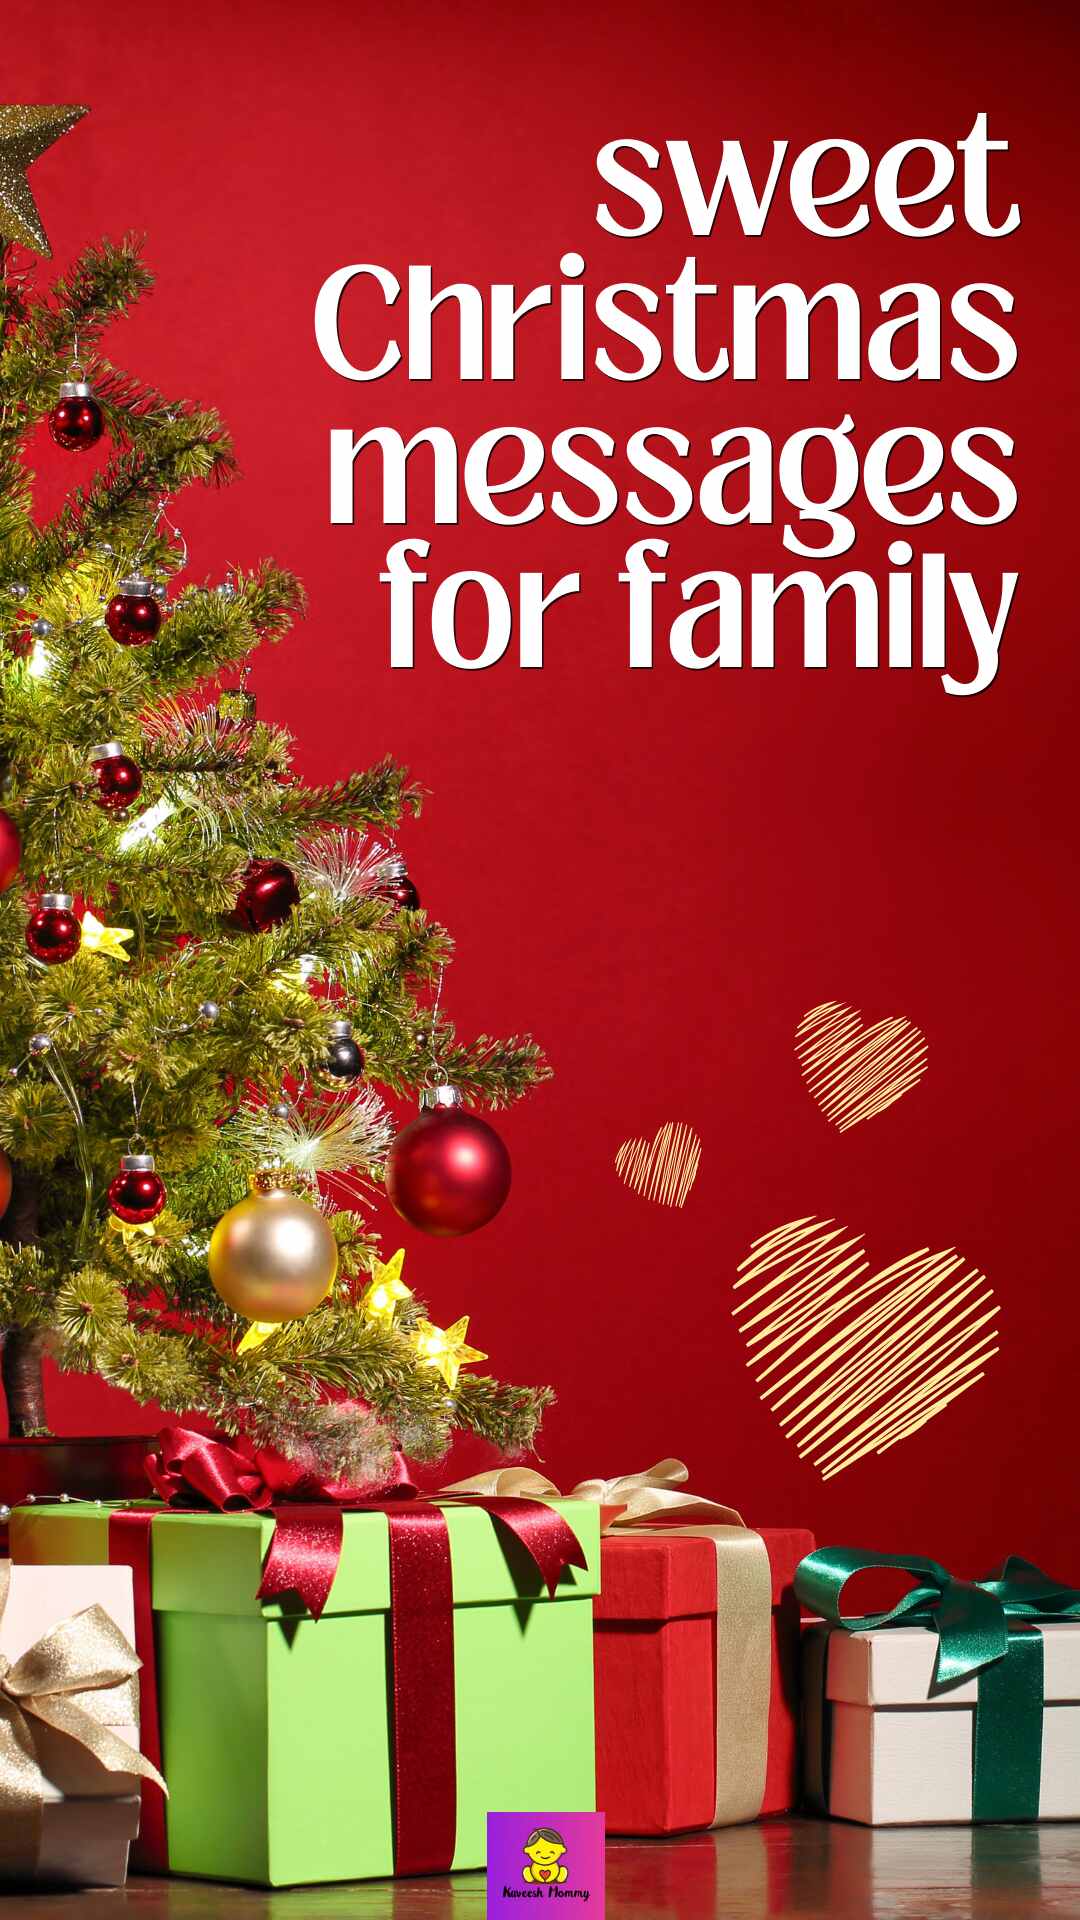 List of sweet Christmas messages for family